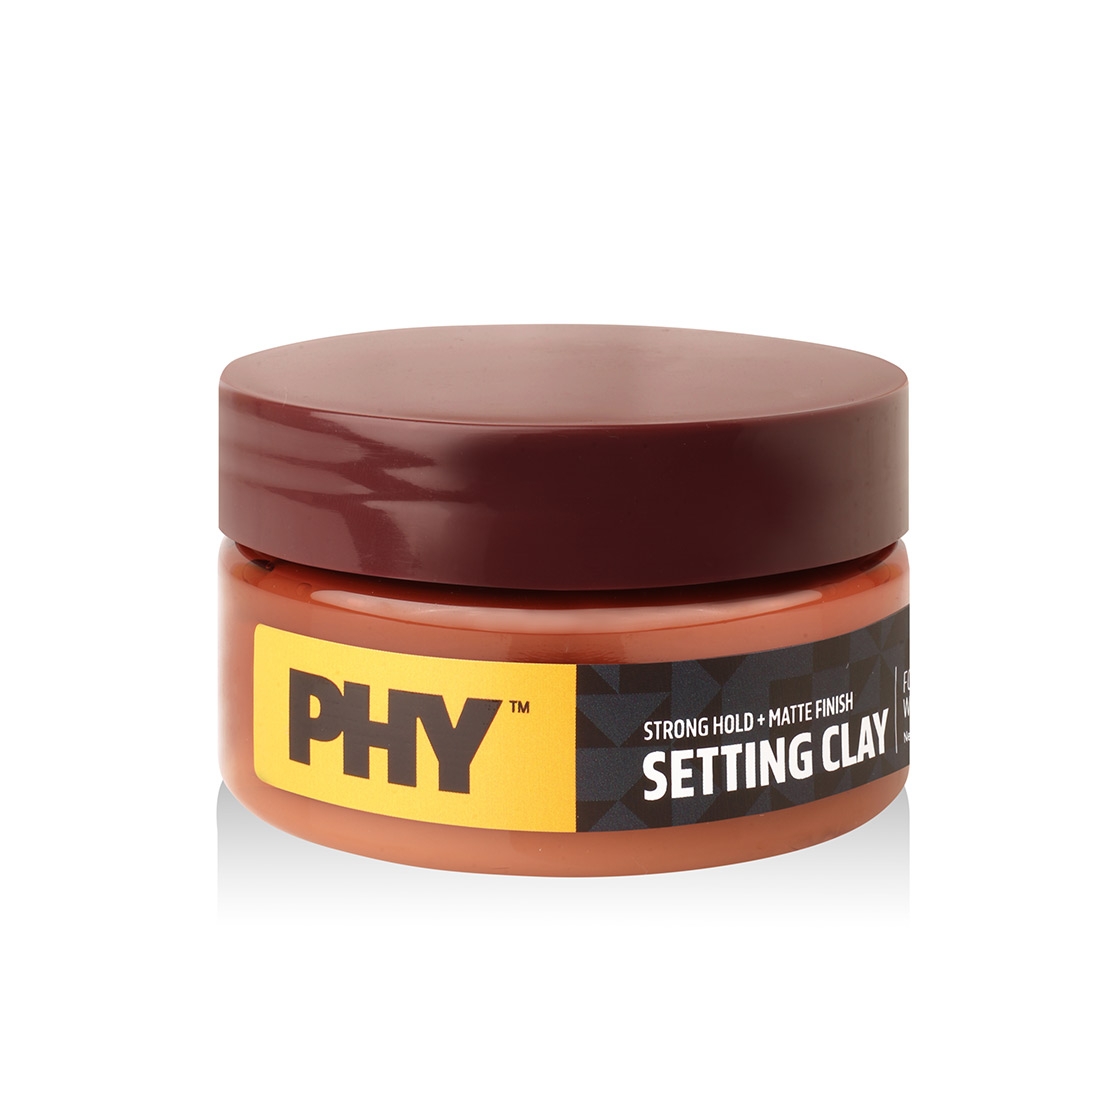 Phy | Phy Setting Clay | Strong Hold + Matte Finish